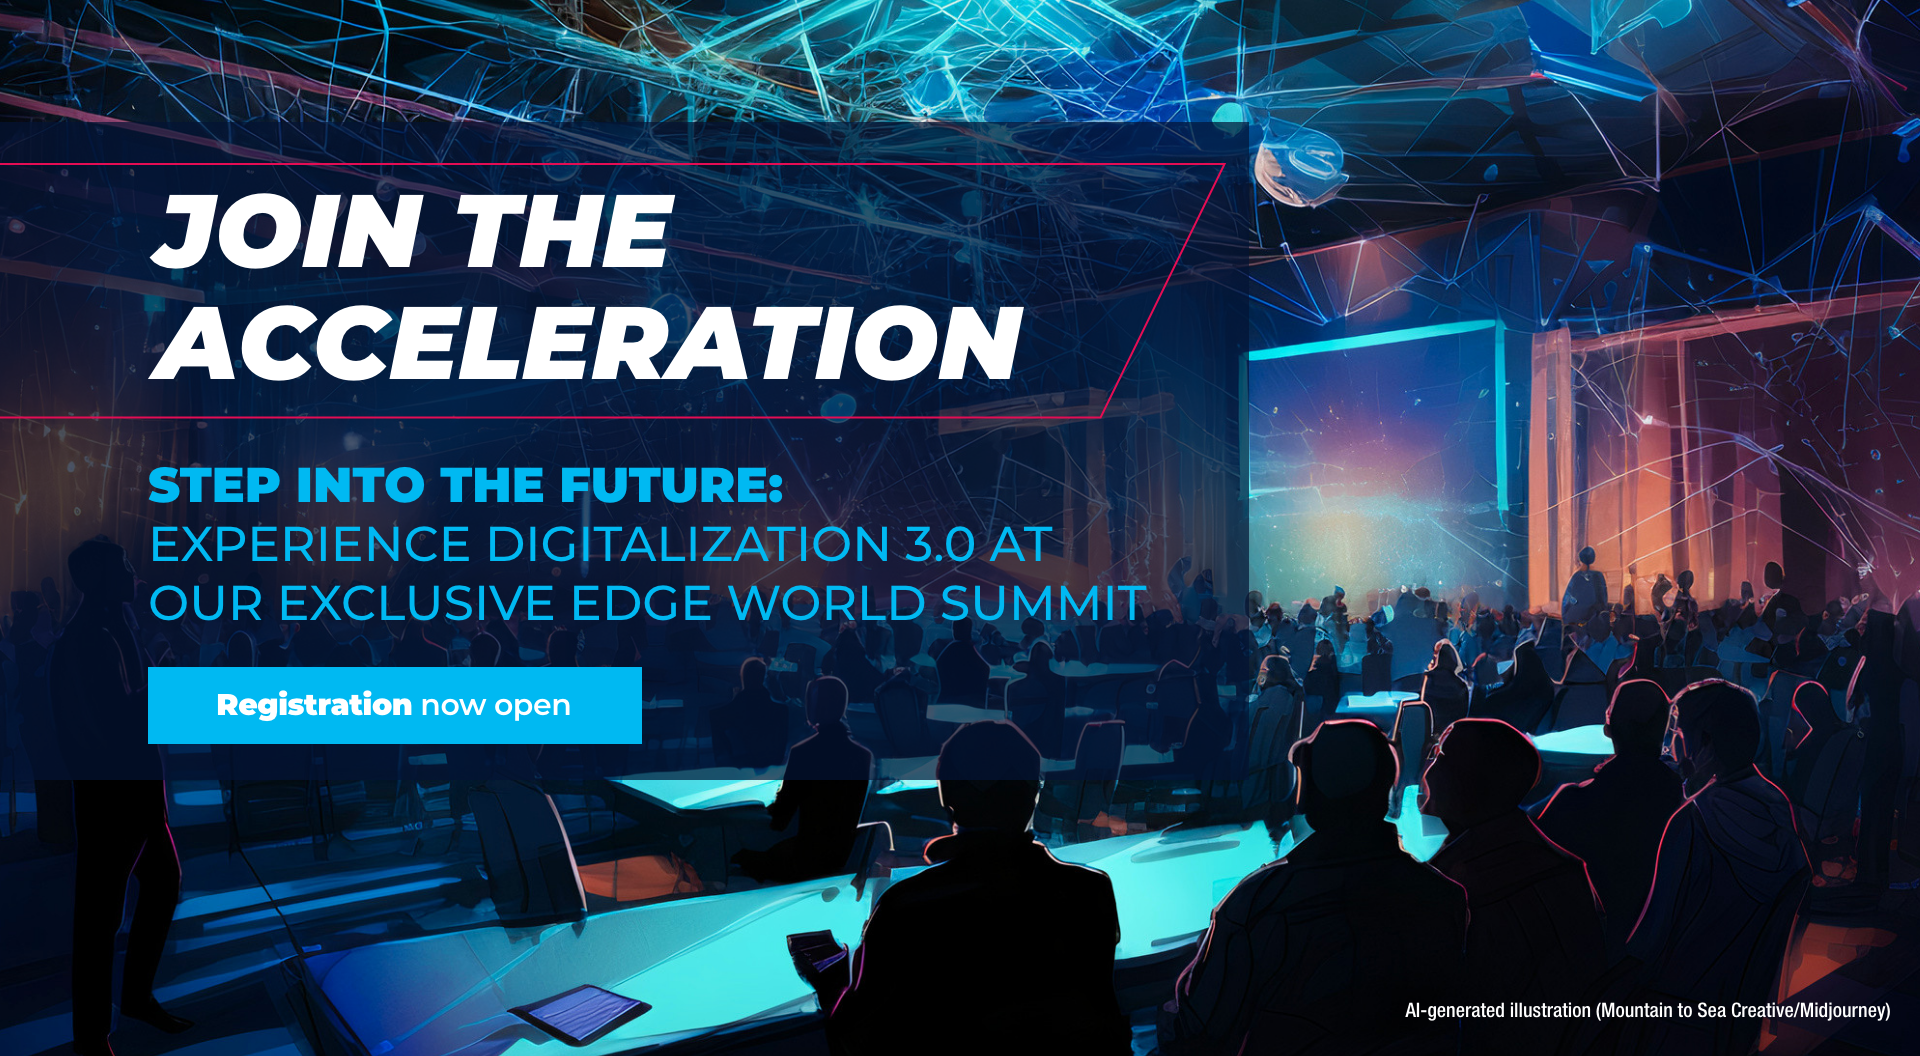 EDGE World Summit - November 14 & 15, 2023 | Join the Acceleration | Silicon Valley Executive Conference about the Acceleration of Digitalization 3.0.